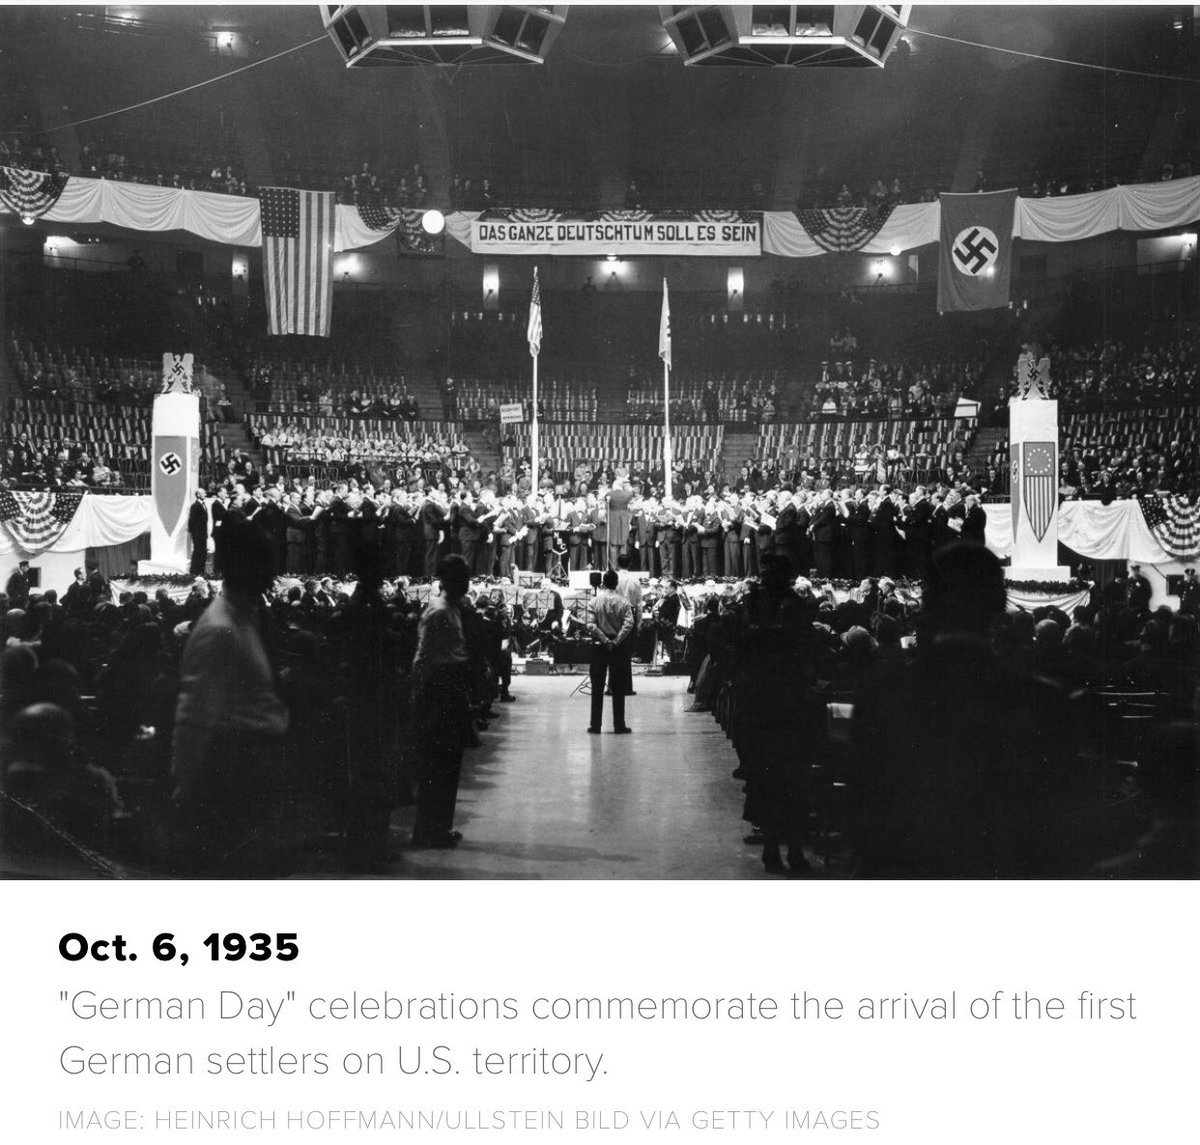 The Nazi Bund held rallies at Madison Madison Square Garden from 1934-1939.On Feb 20, 1939—20,000 Bund members held their largest “Pro-America Rally.”Inside, Hitler Nazi supporters filled the aisles while speakers spoke against Dem POTUS “Frank D. Rosenfeld” & his “Jew Deal.”